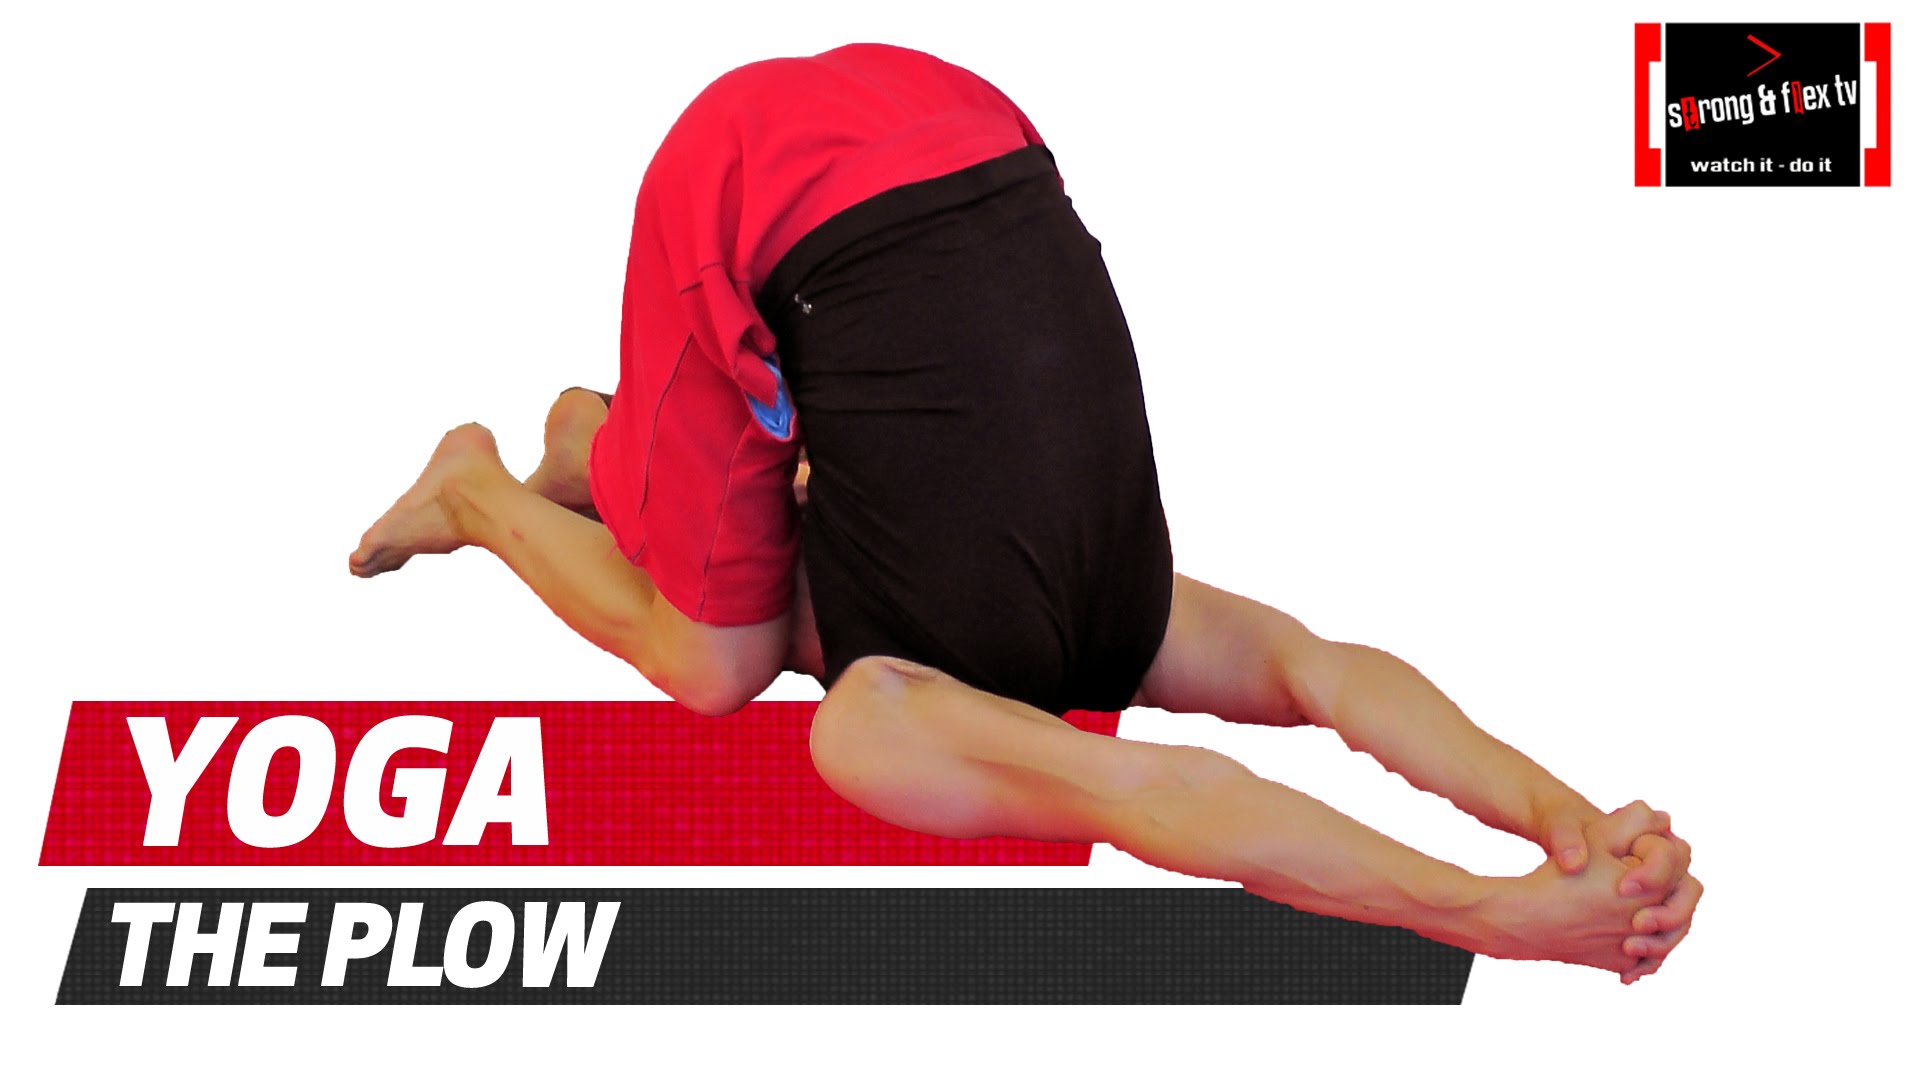 Yoga pose - Plow pose - Stretches neck and upper back - YouTube